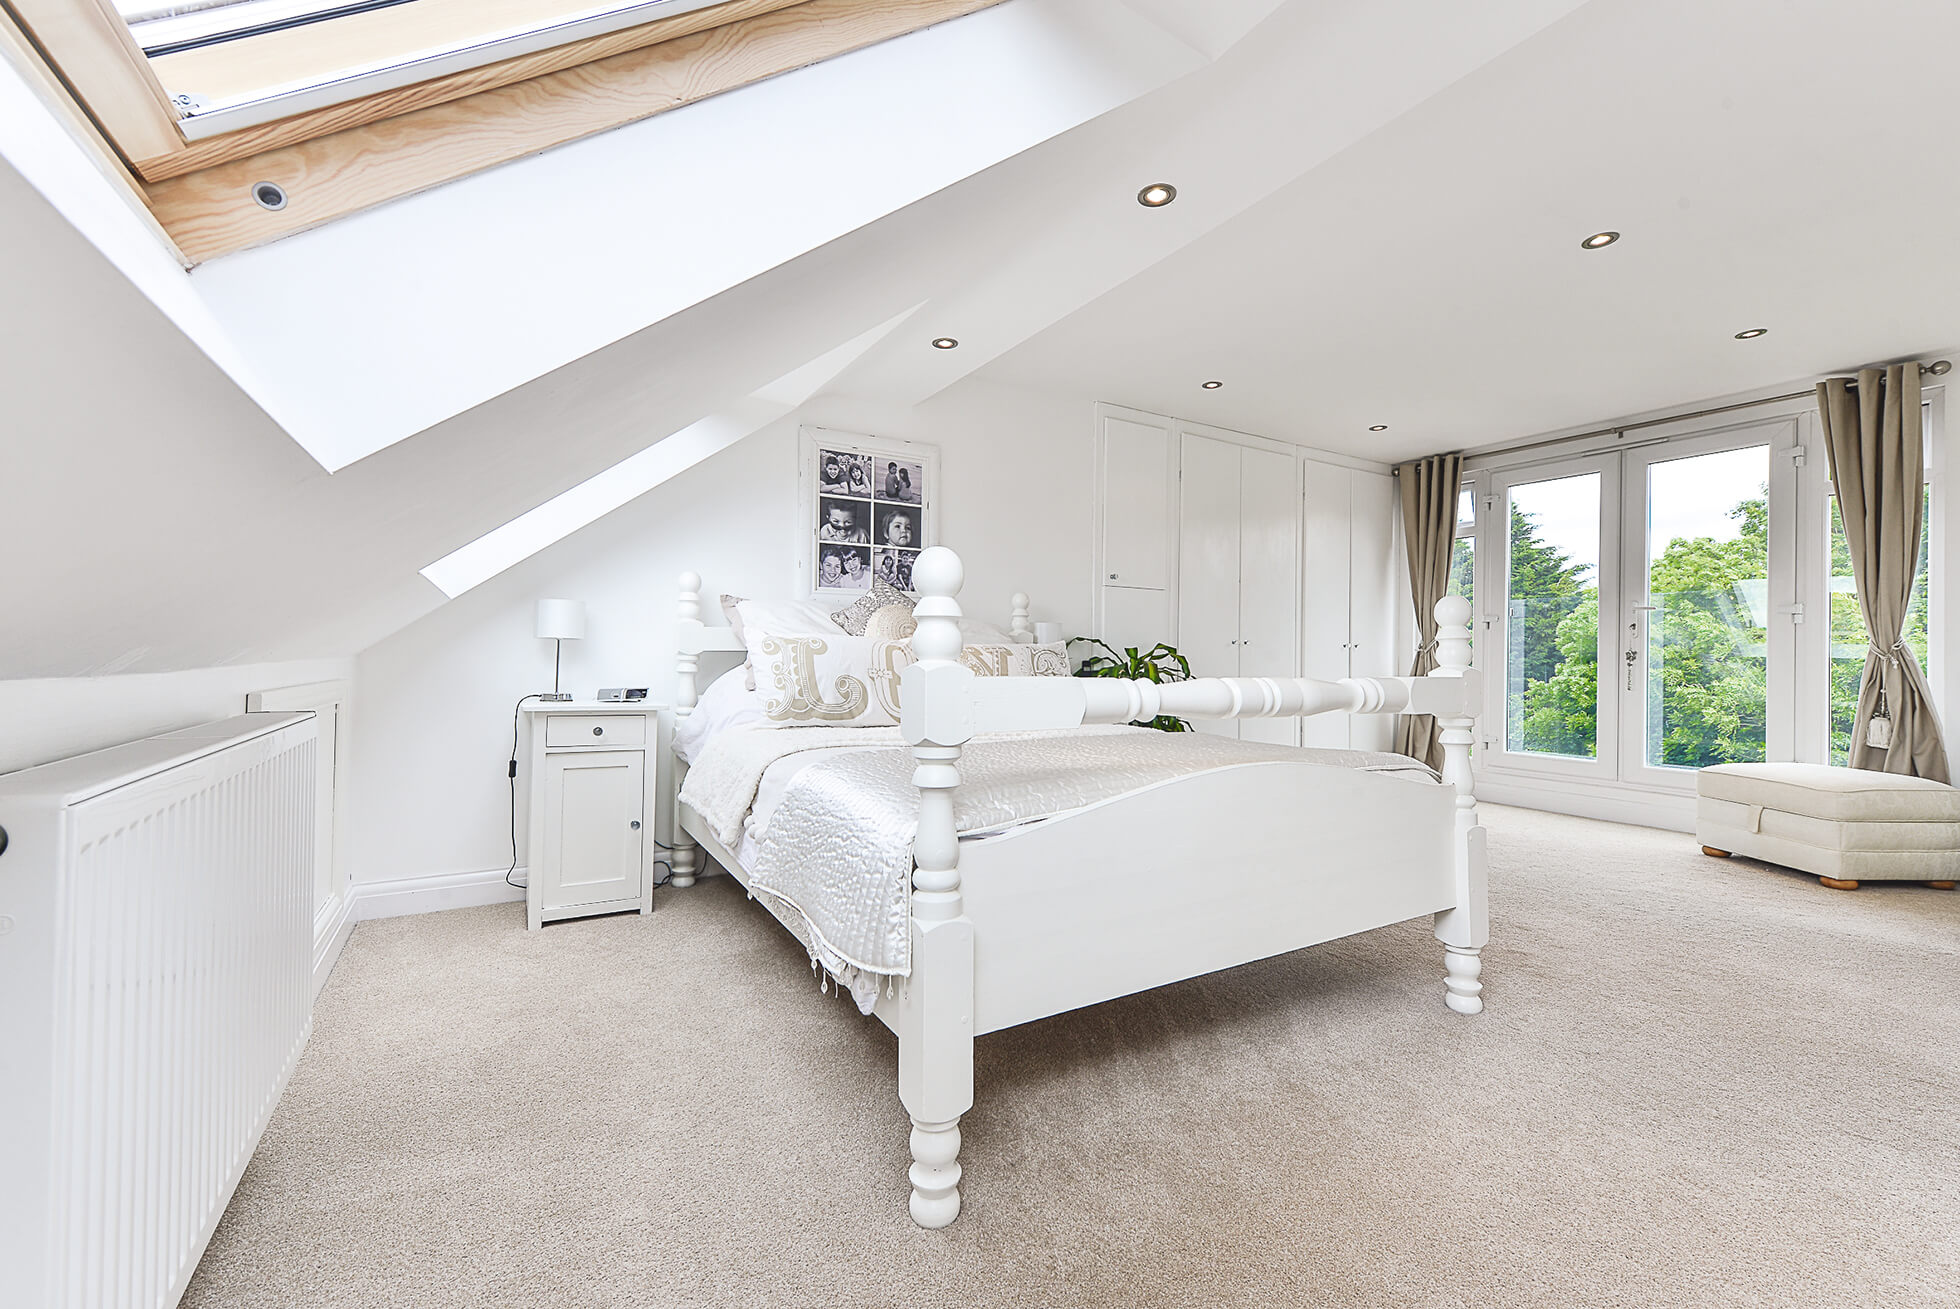 Do you have a question about converting your Loft in Abbots Langley? Here are the most popular questions asked by our clients.